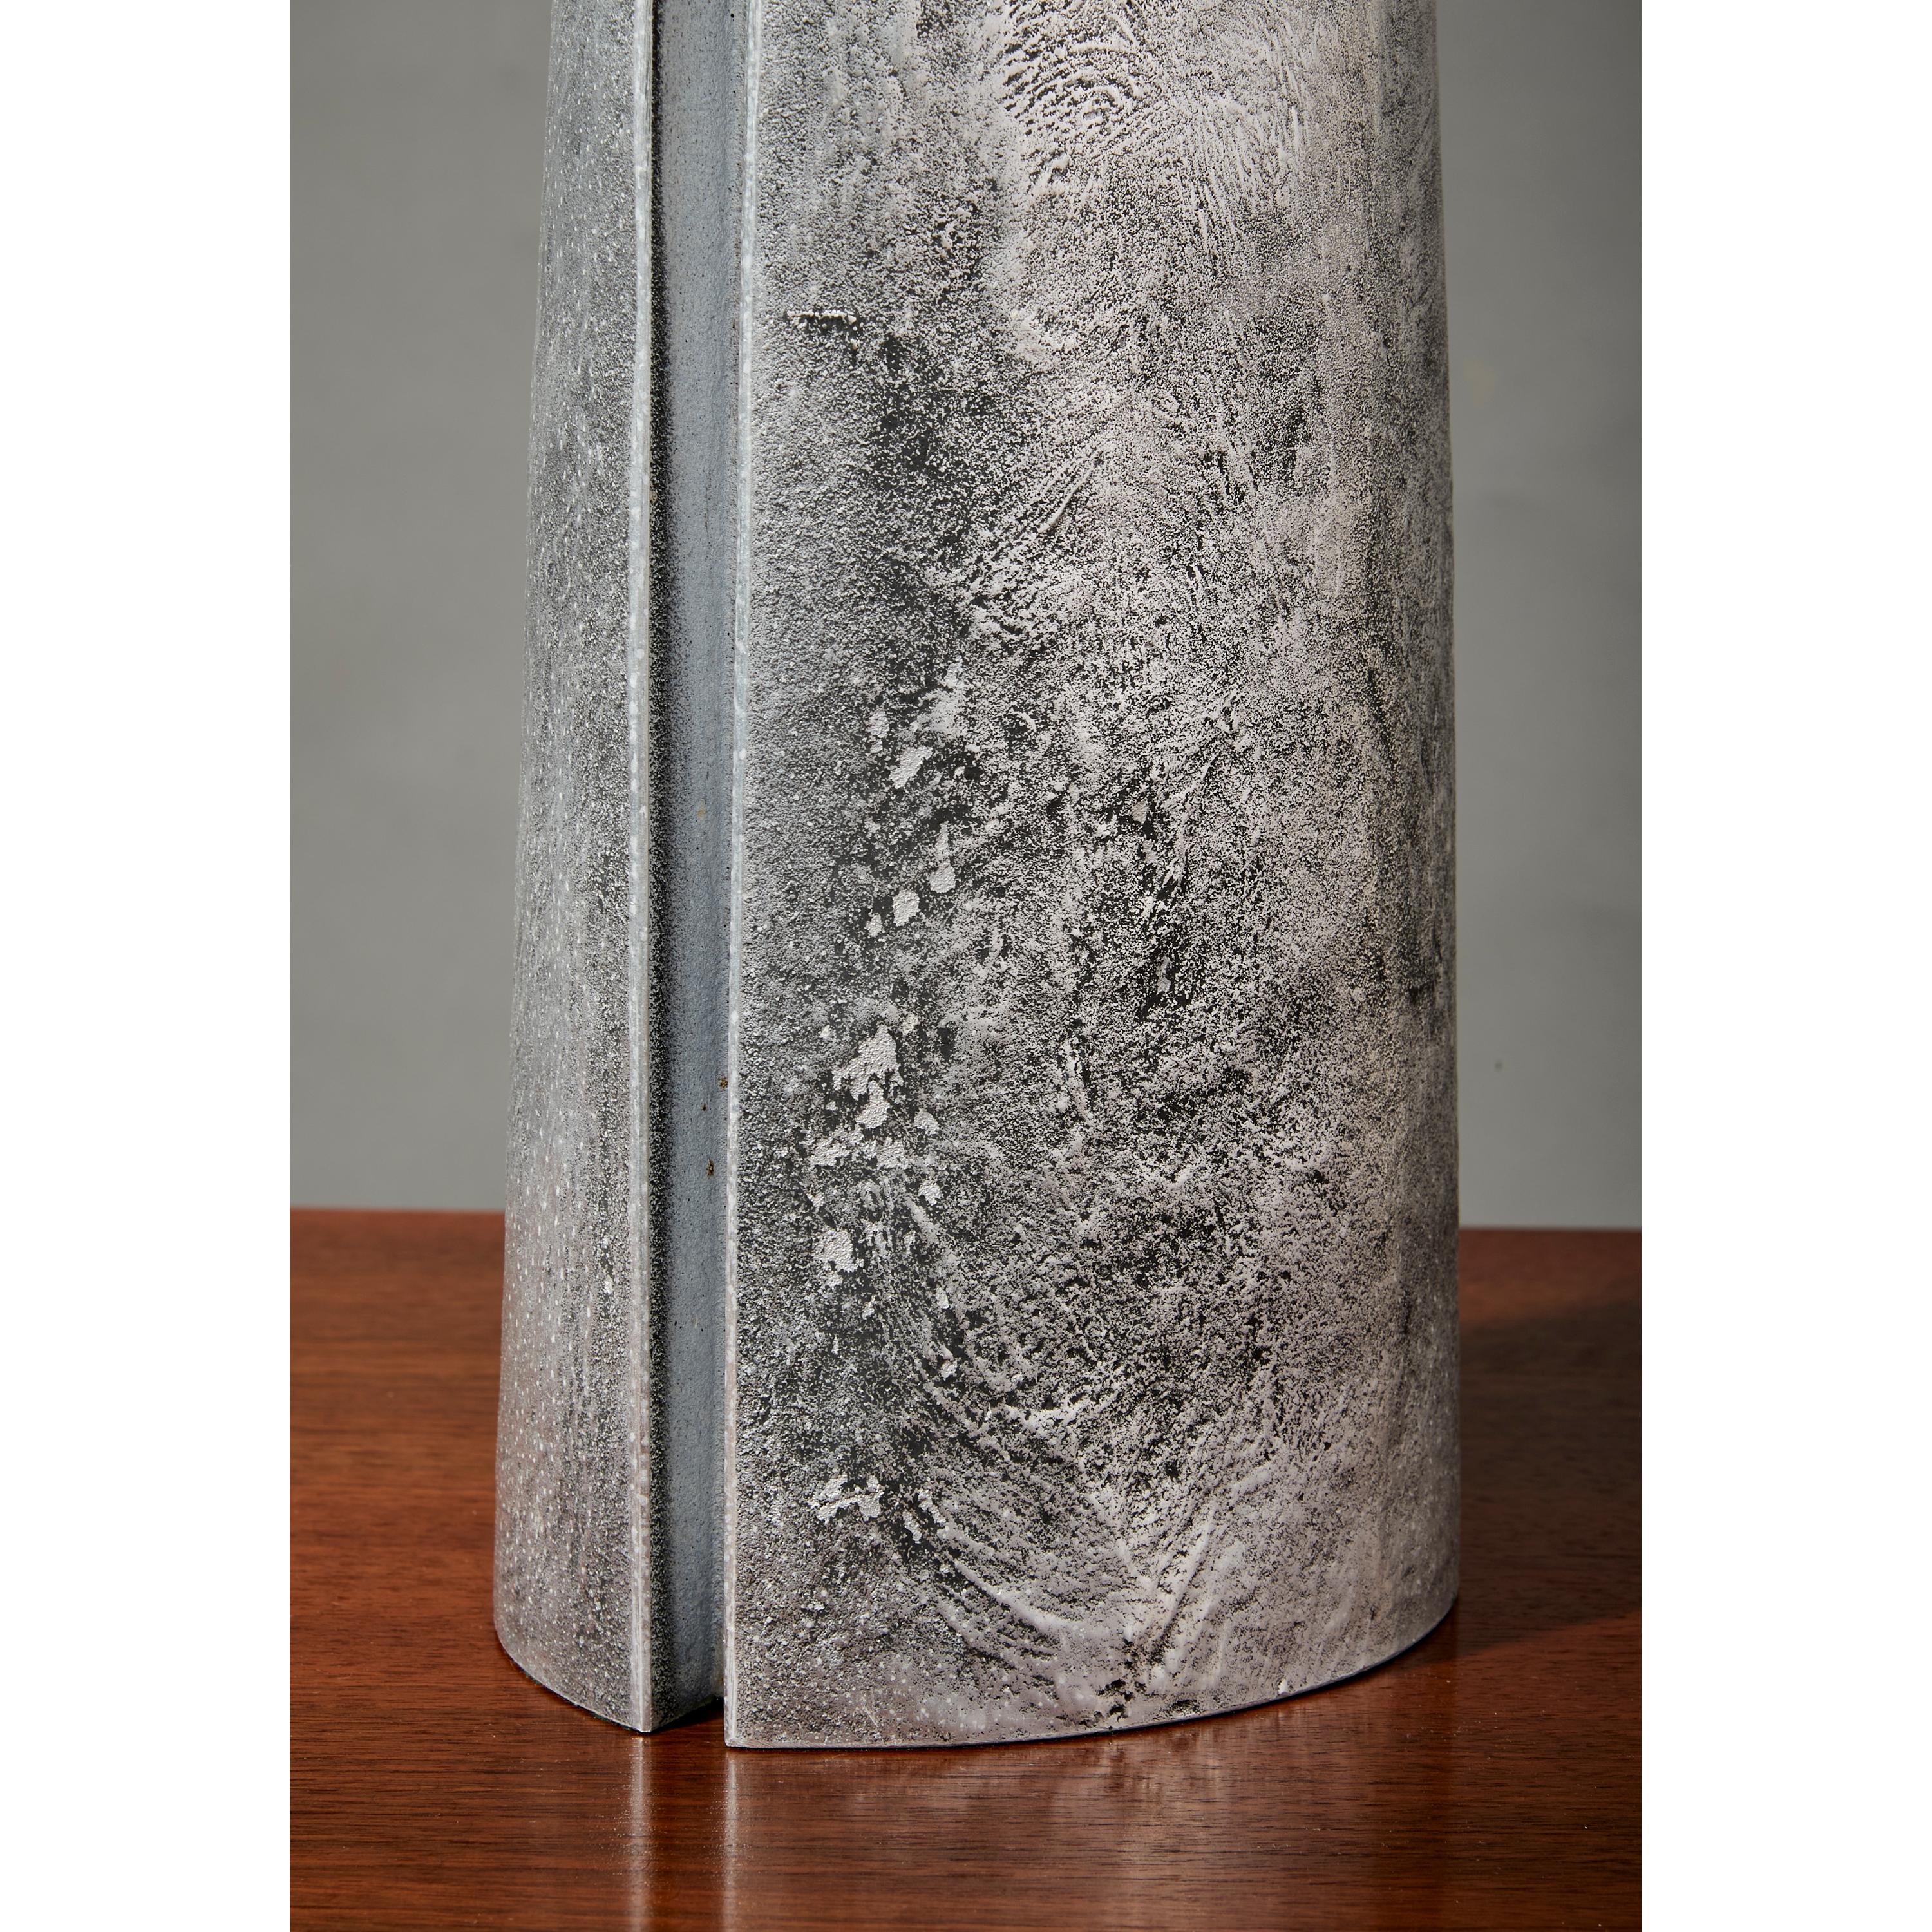 Brutalist Table Lamp in Silver Textured Aluminium with Black Shade, Italy 1970's For Sale 2